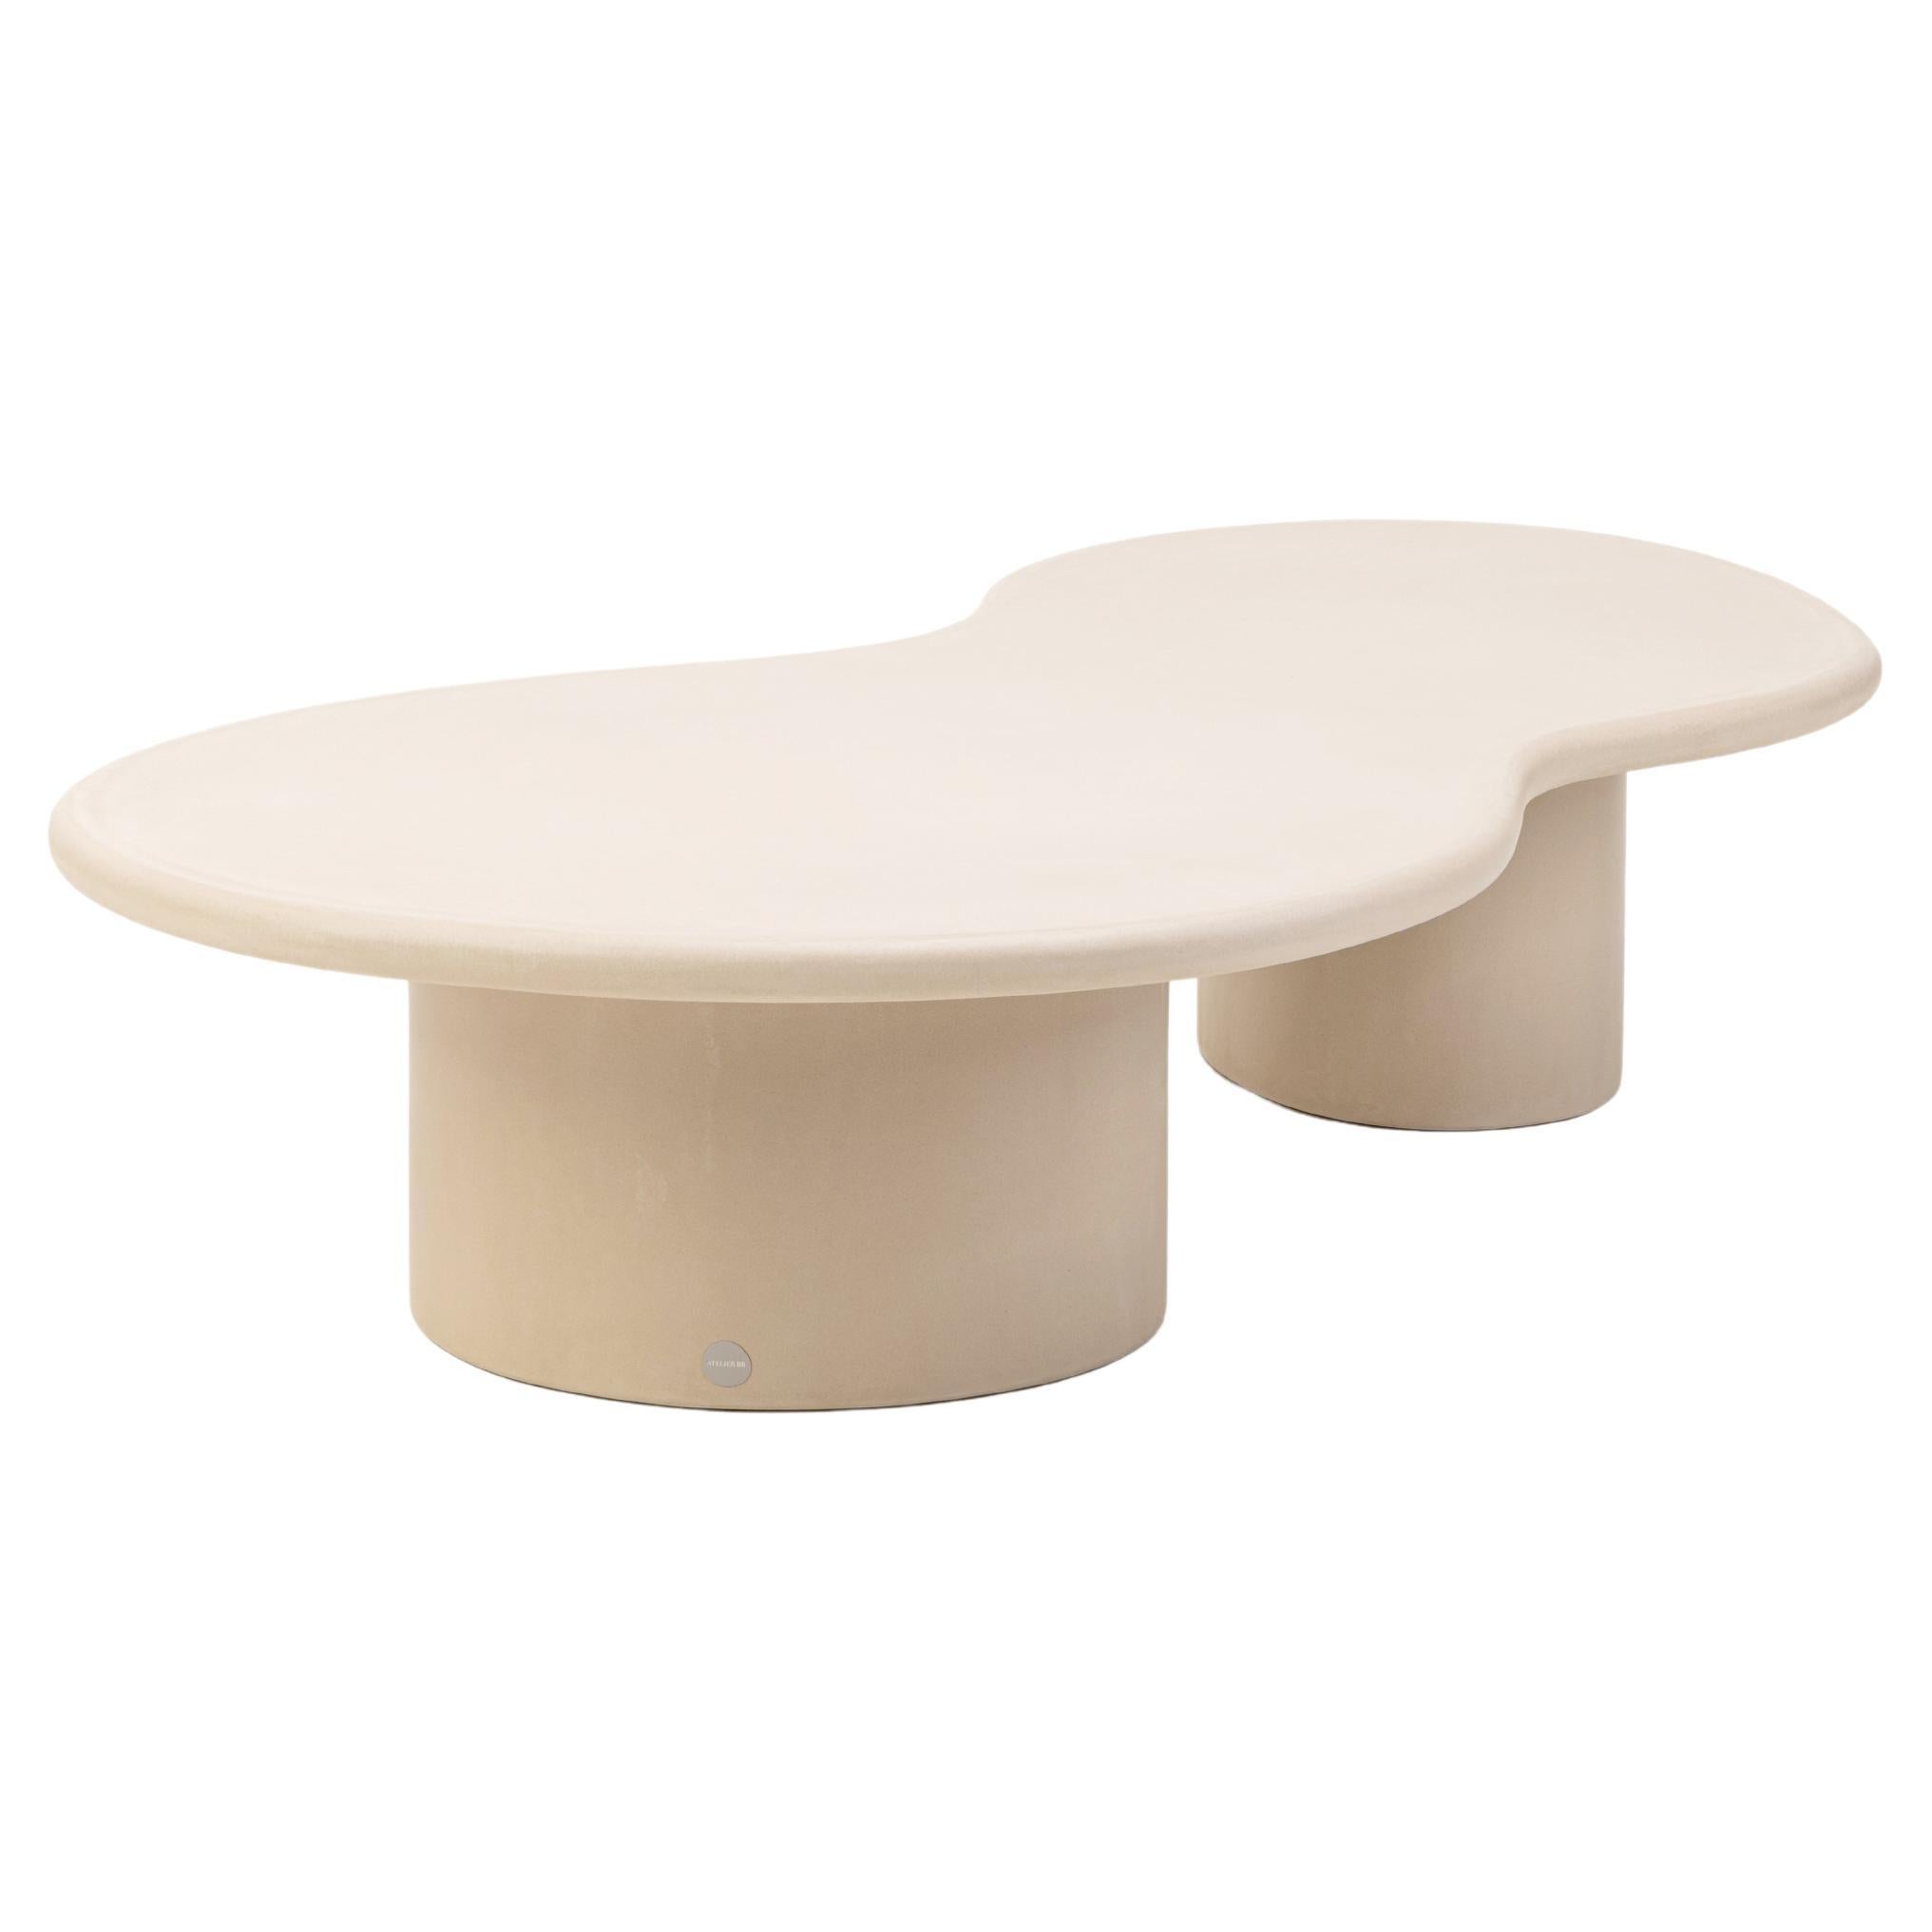 Contemporary Organic Natural Plaster "Ovum" Table 170cm by Isabelle Beaumont